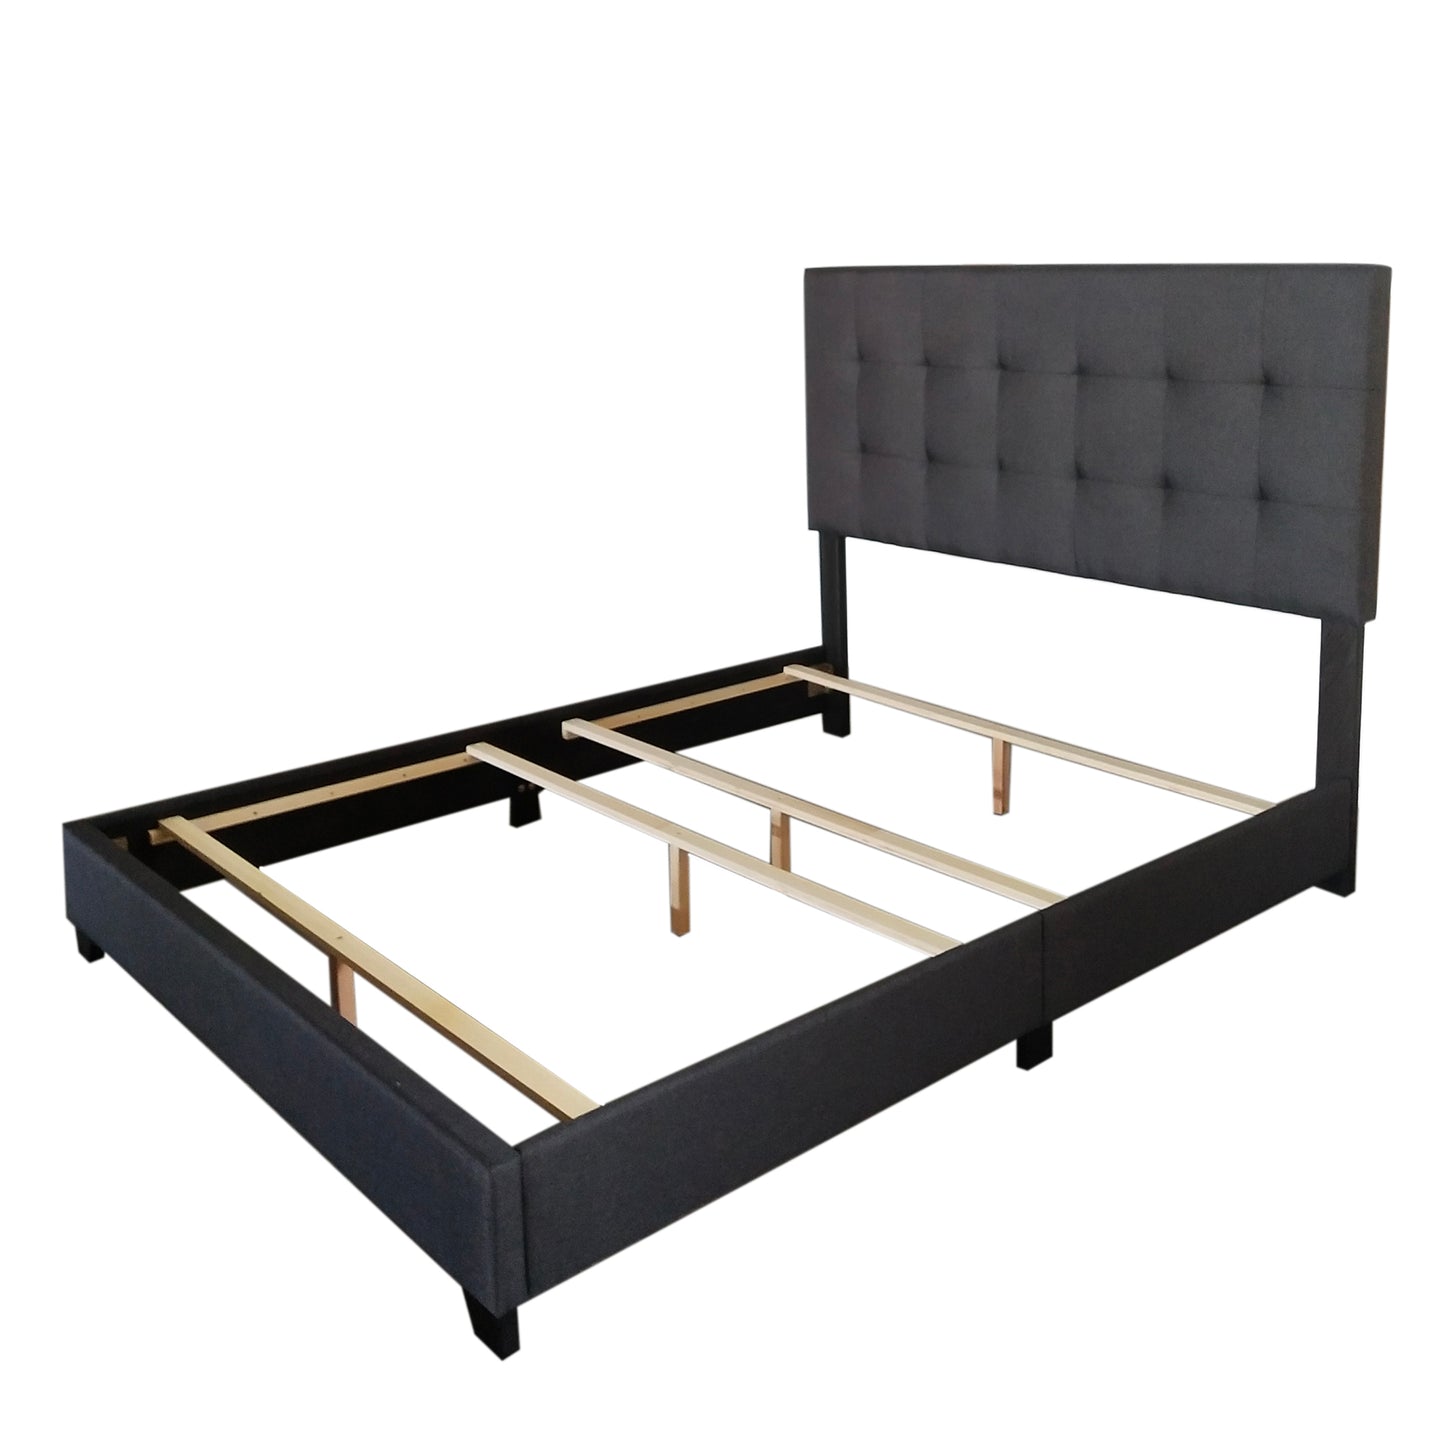 Exton 60" Queen Bed in Charcoal